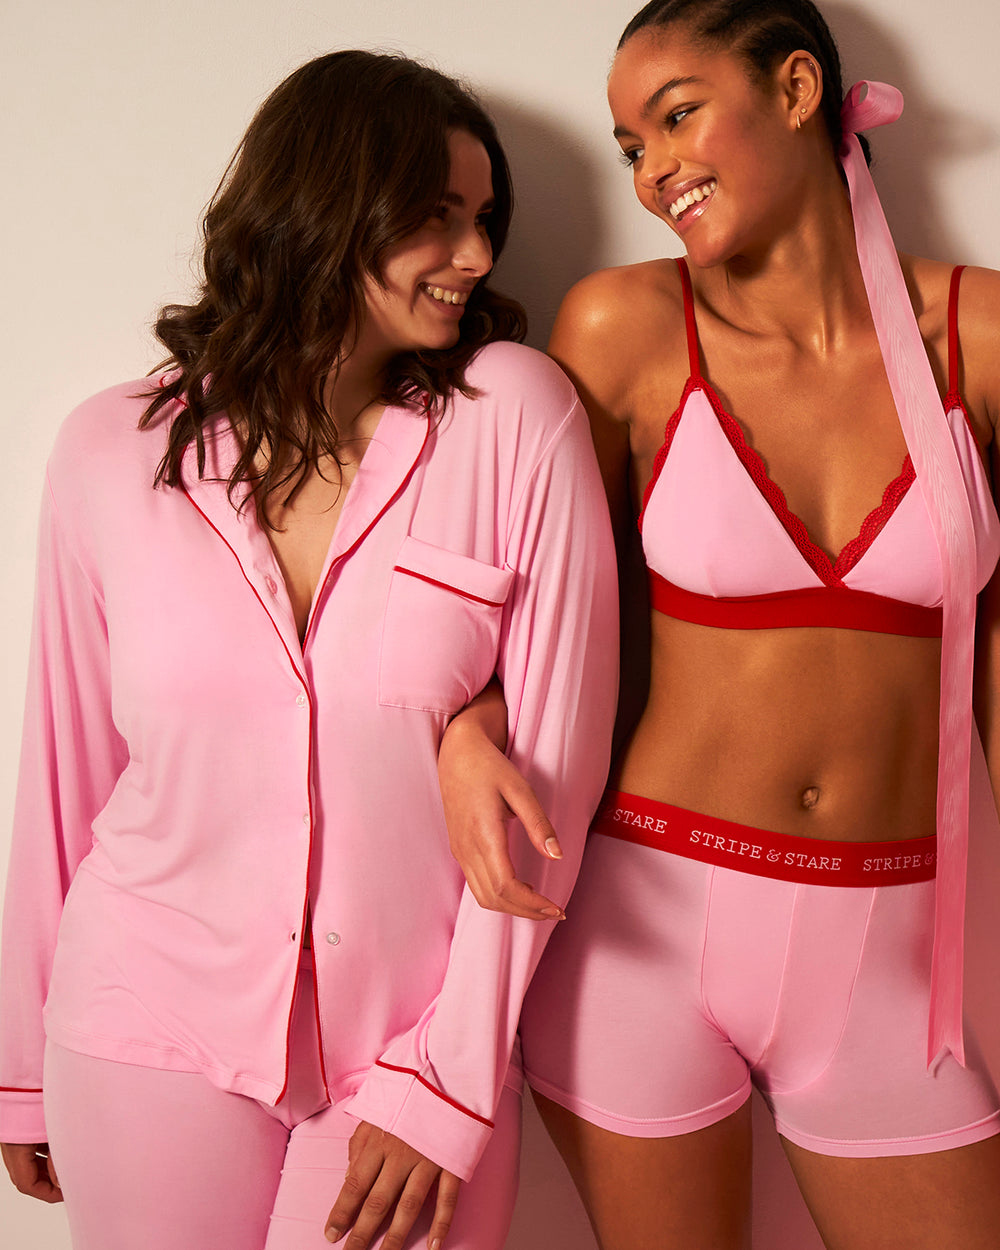 Long Pajama Set - Pink and Red Contrast Stripe & Stare